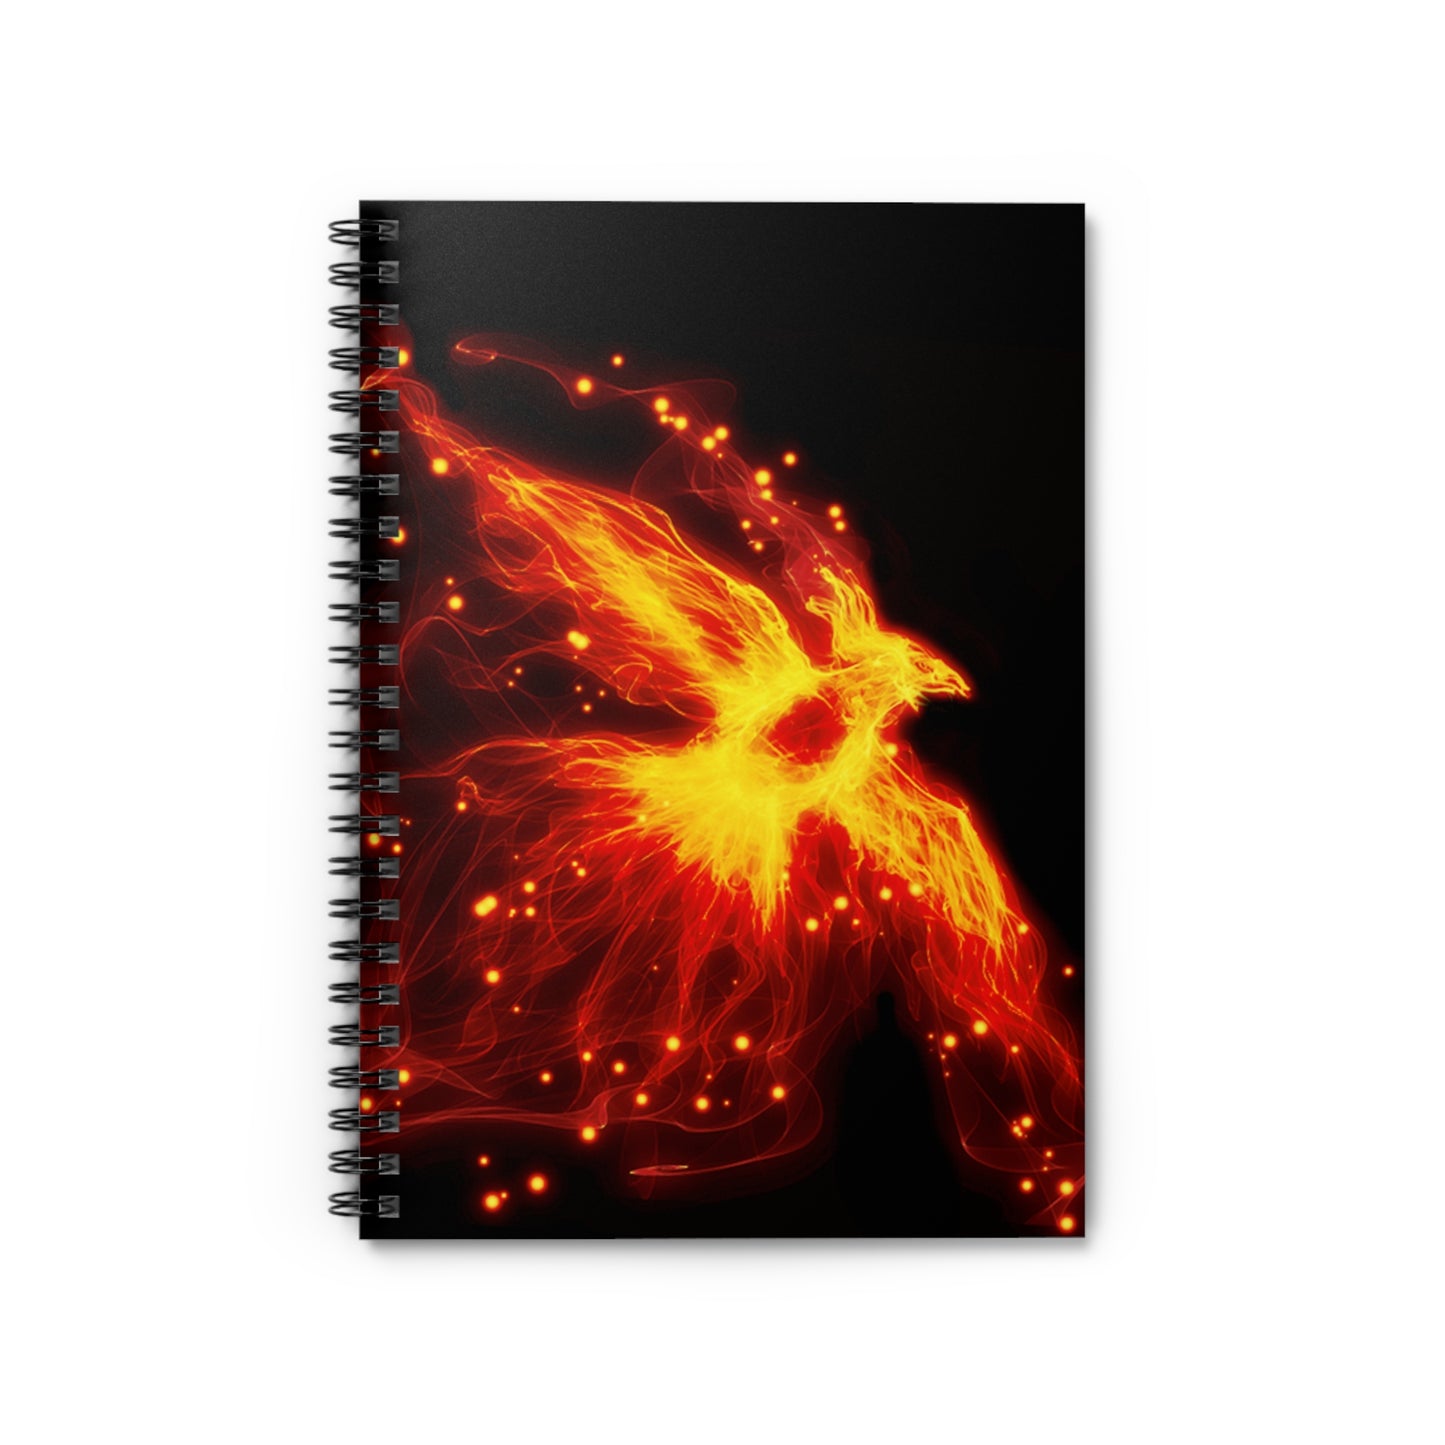 Flames Of The Phoenix Rising Spiral Journal Notebook - Ruled Line